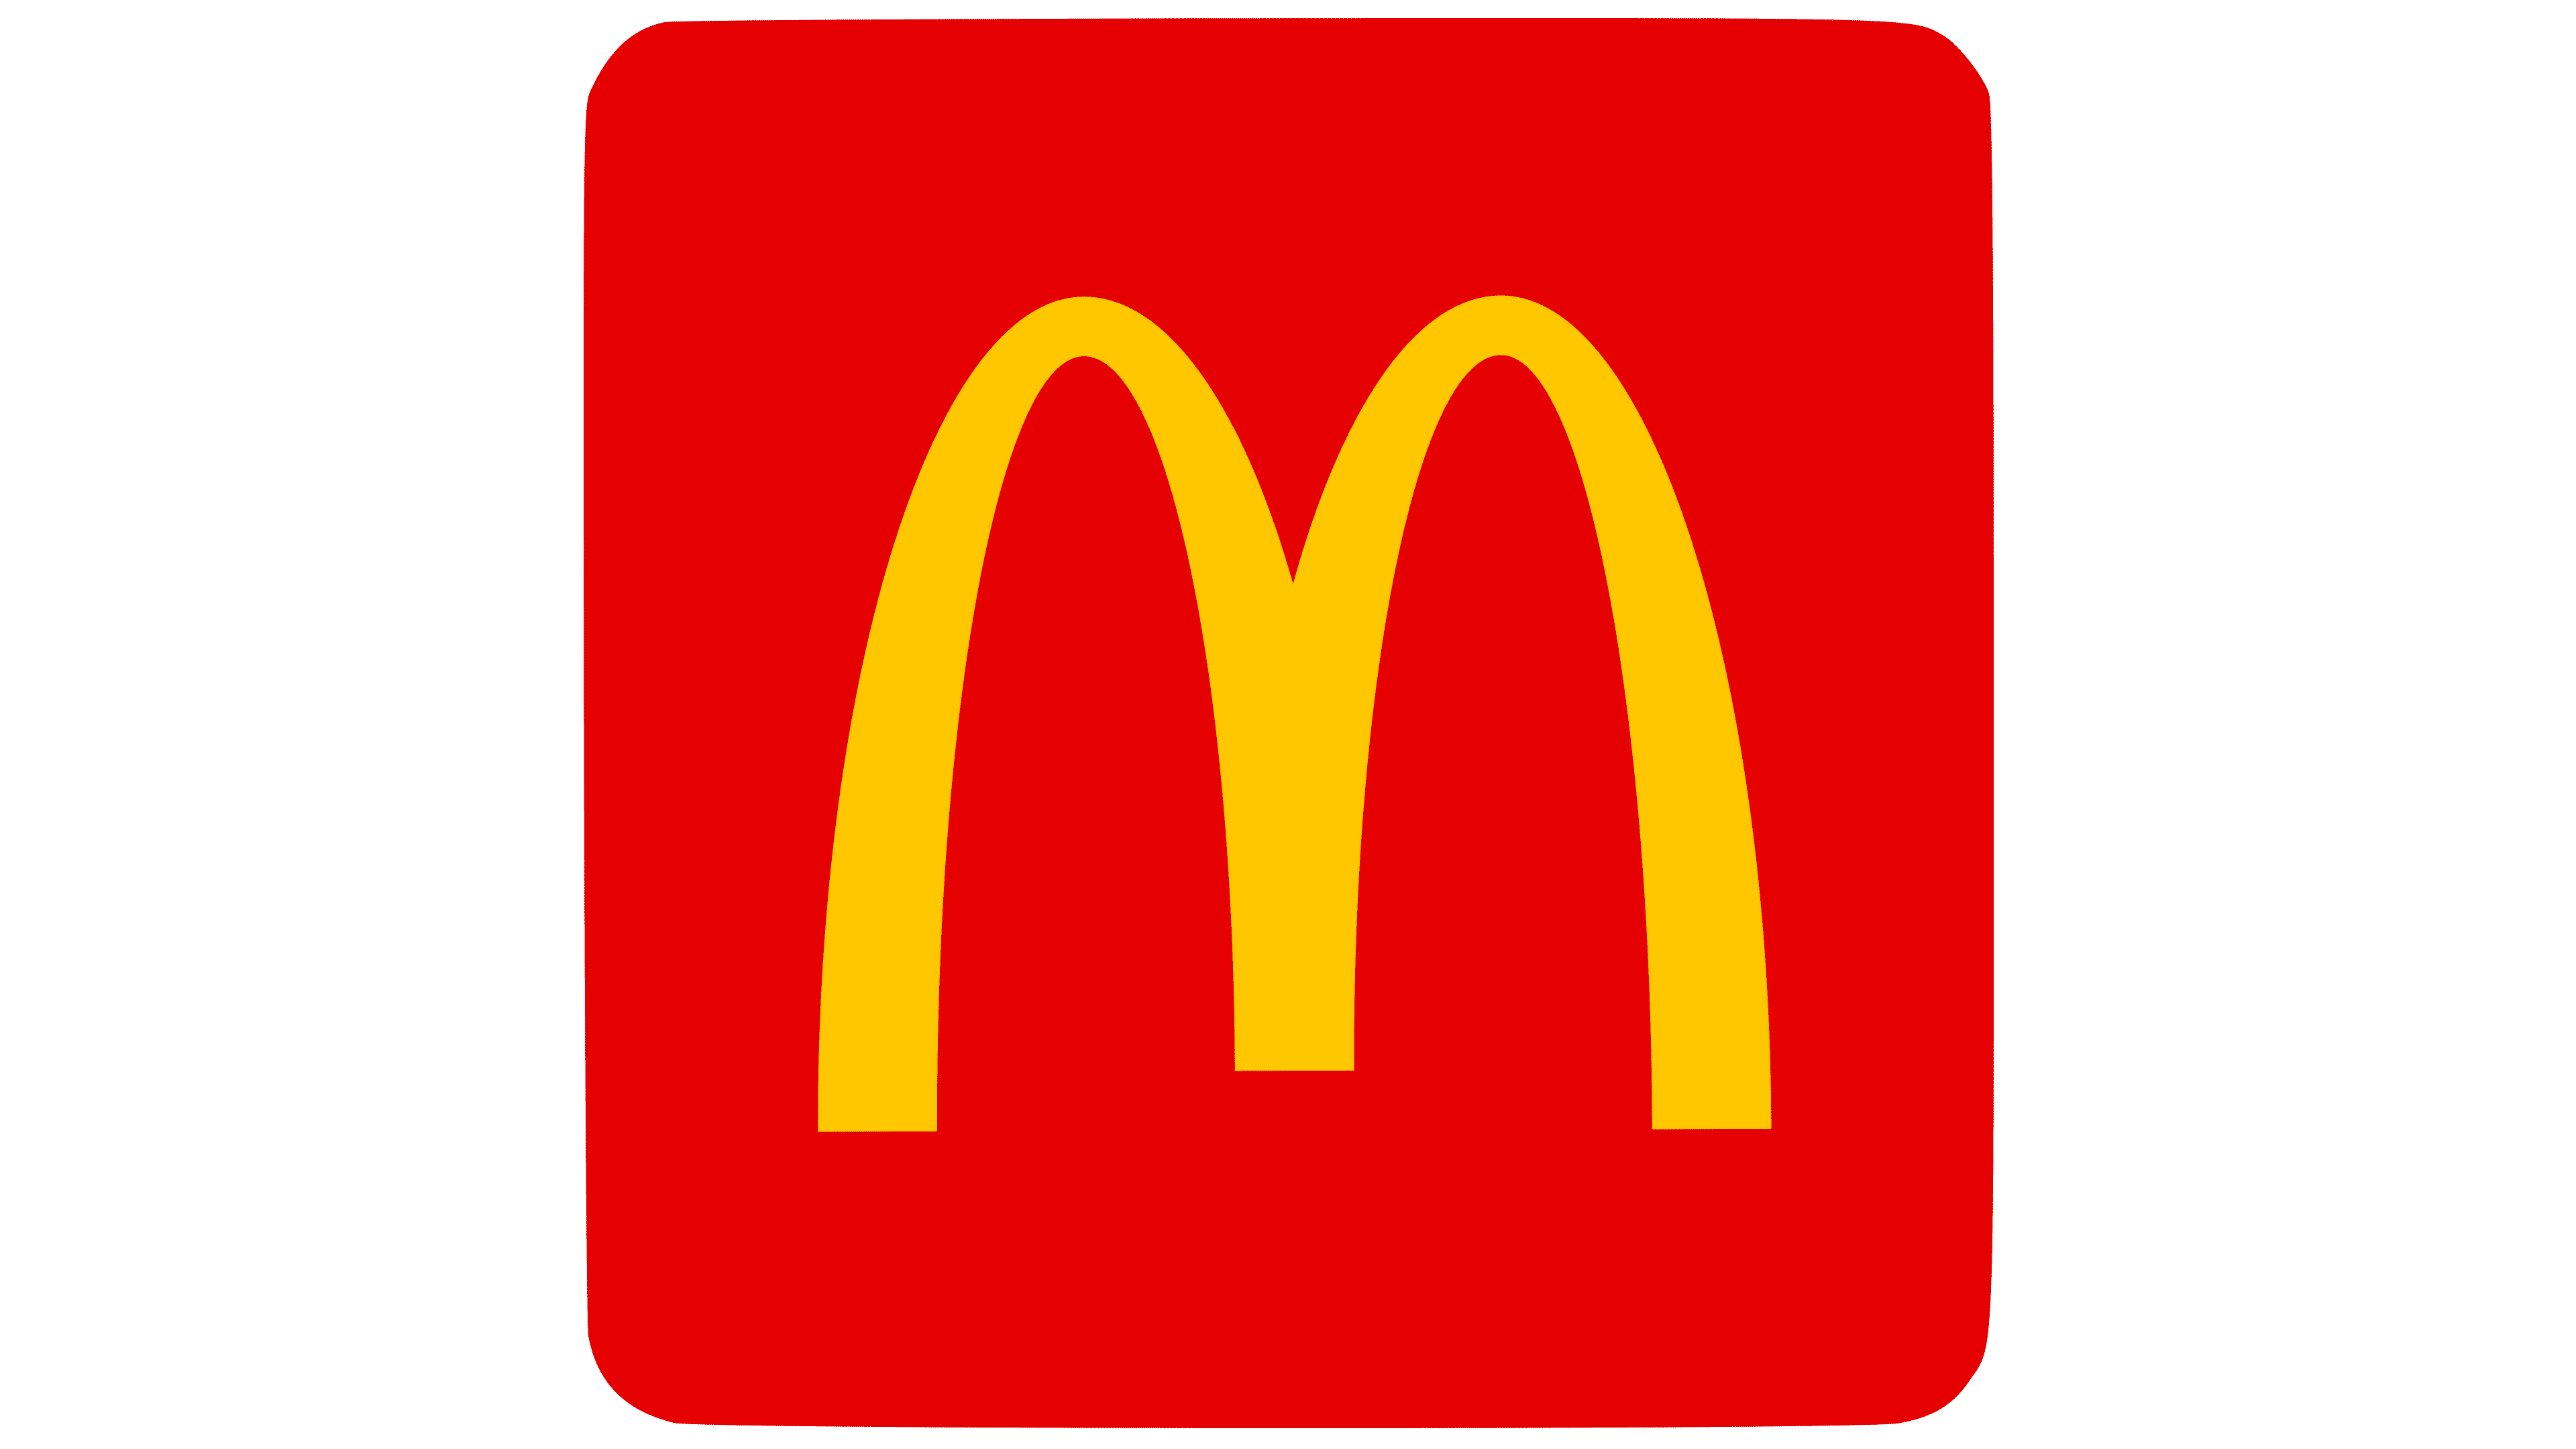 McDonald's: a company with an Outstanding Visual Identity Design